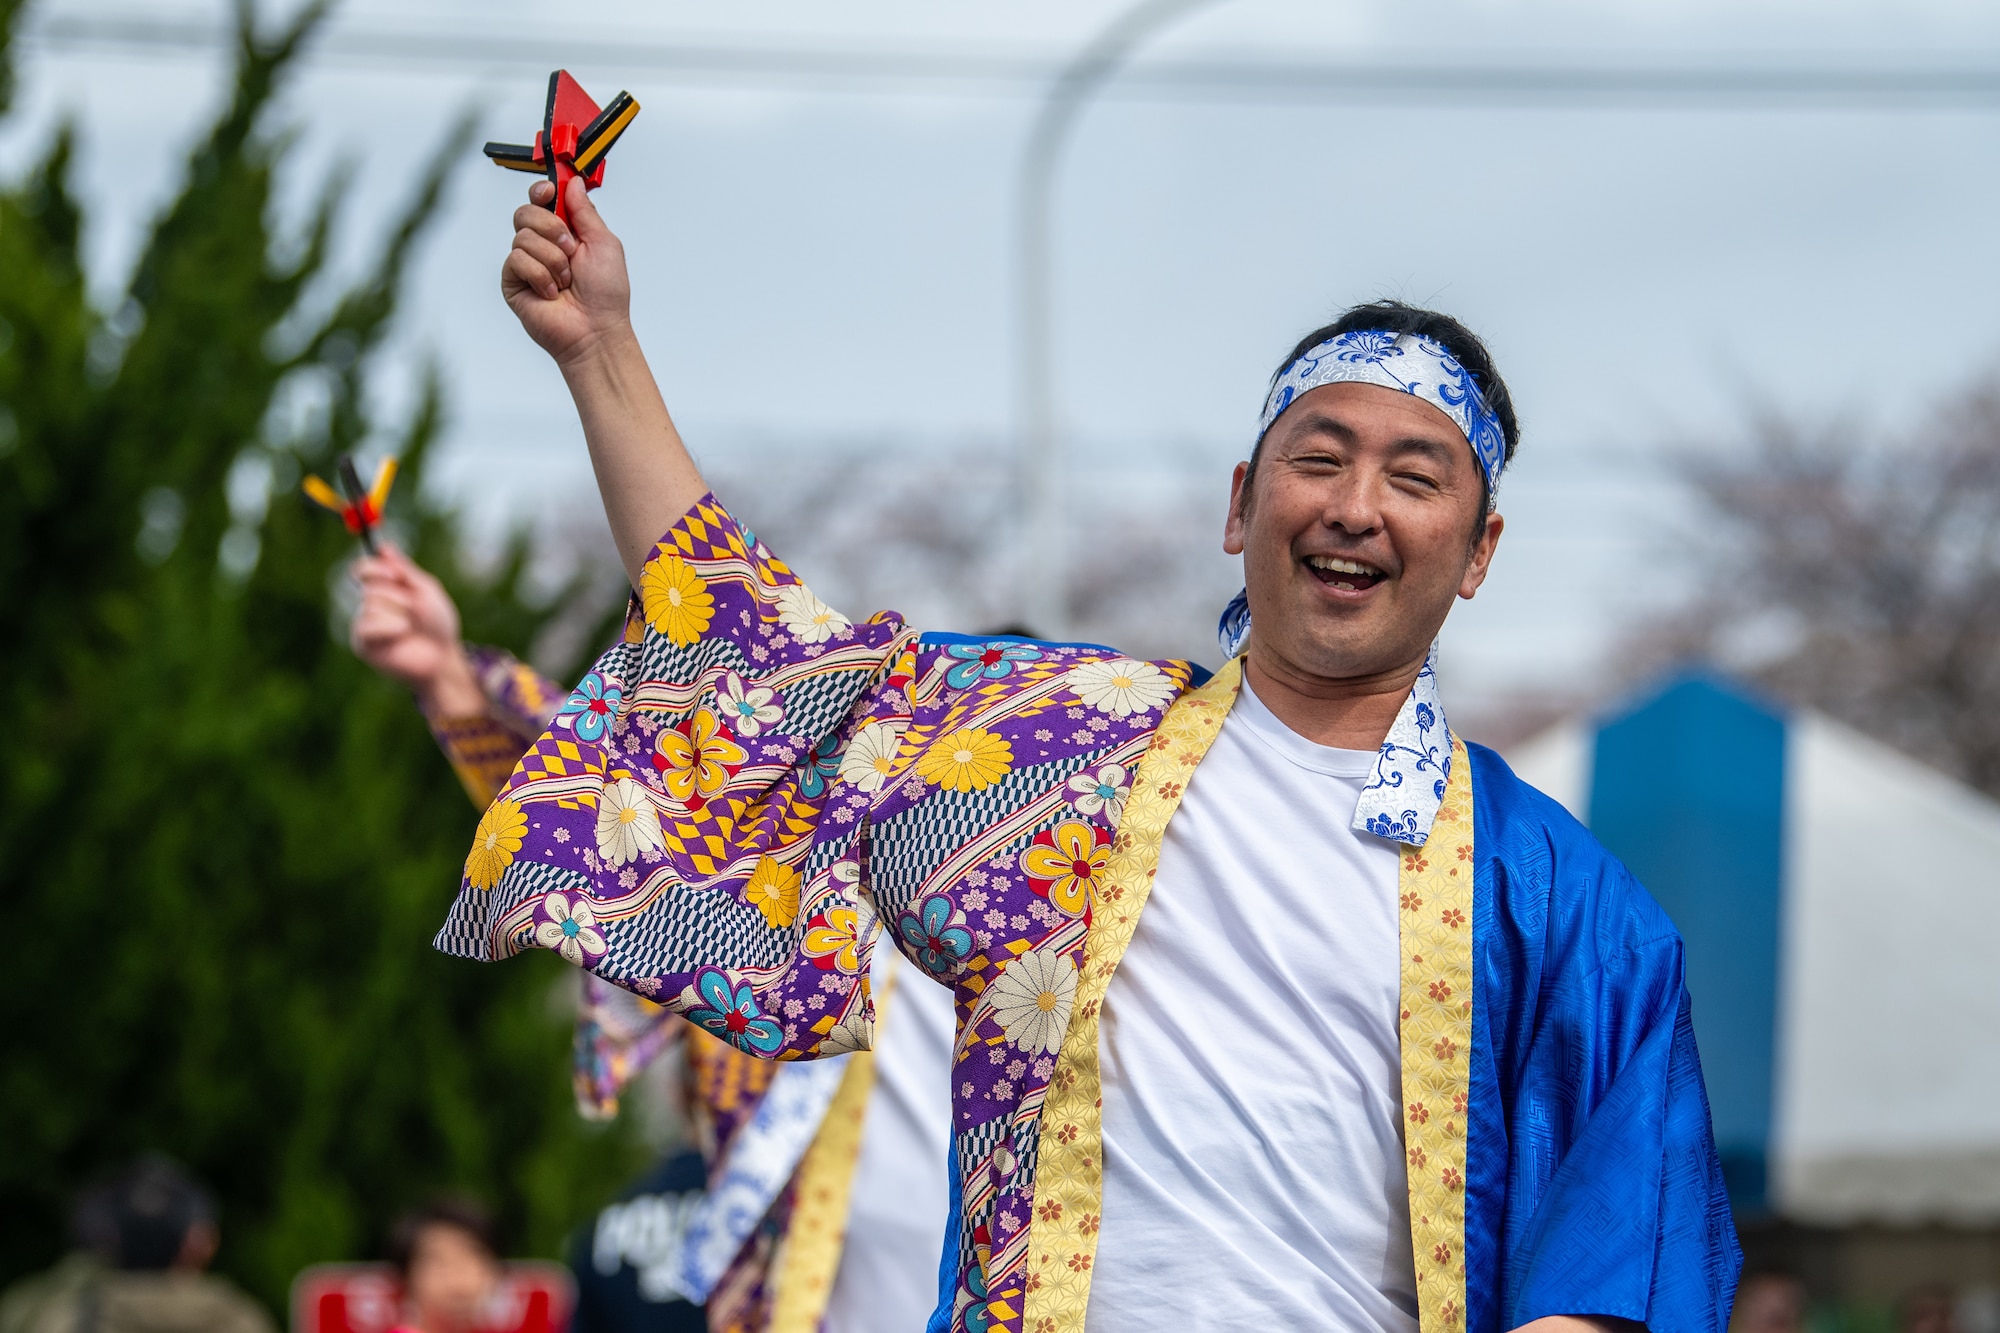 Japanese and Yokota Air Base community members gather for a spring festival.